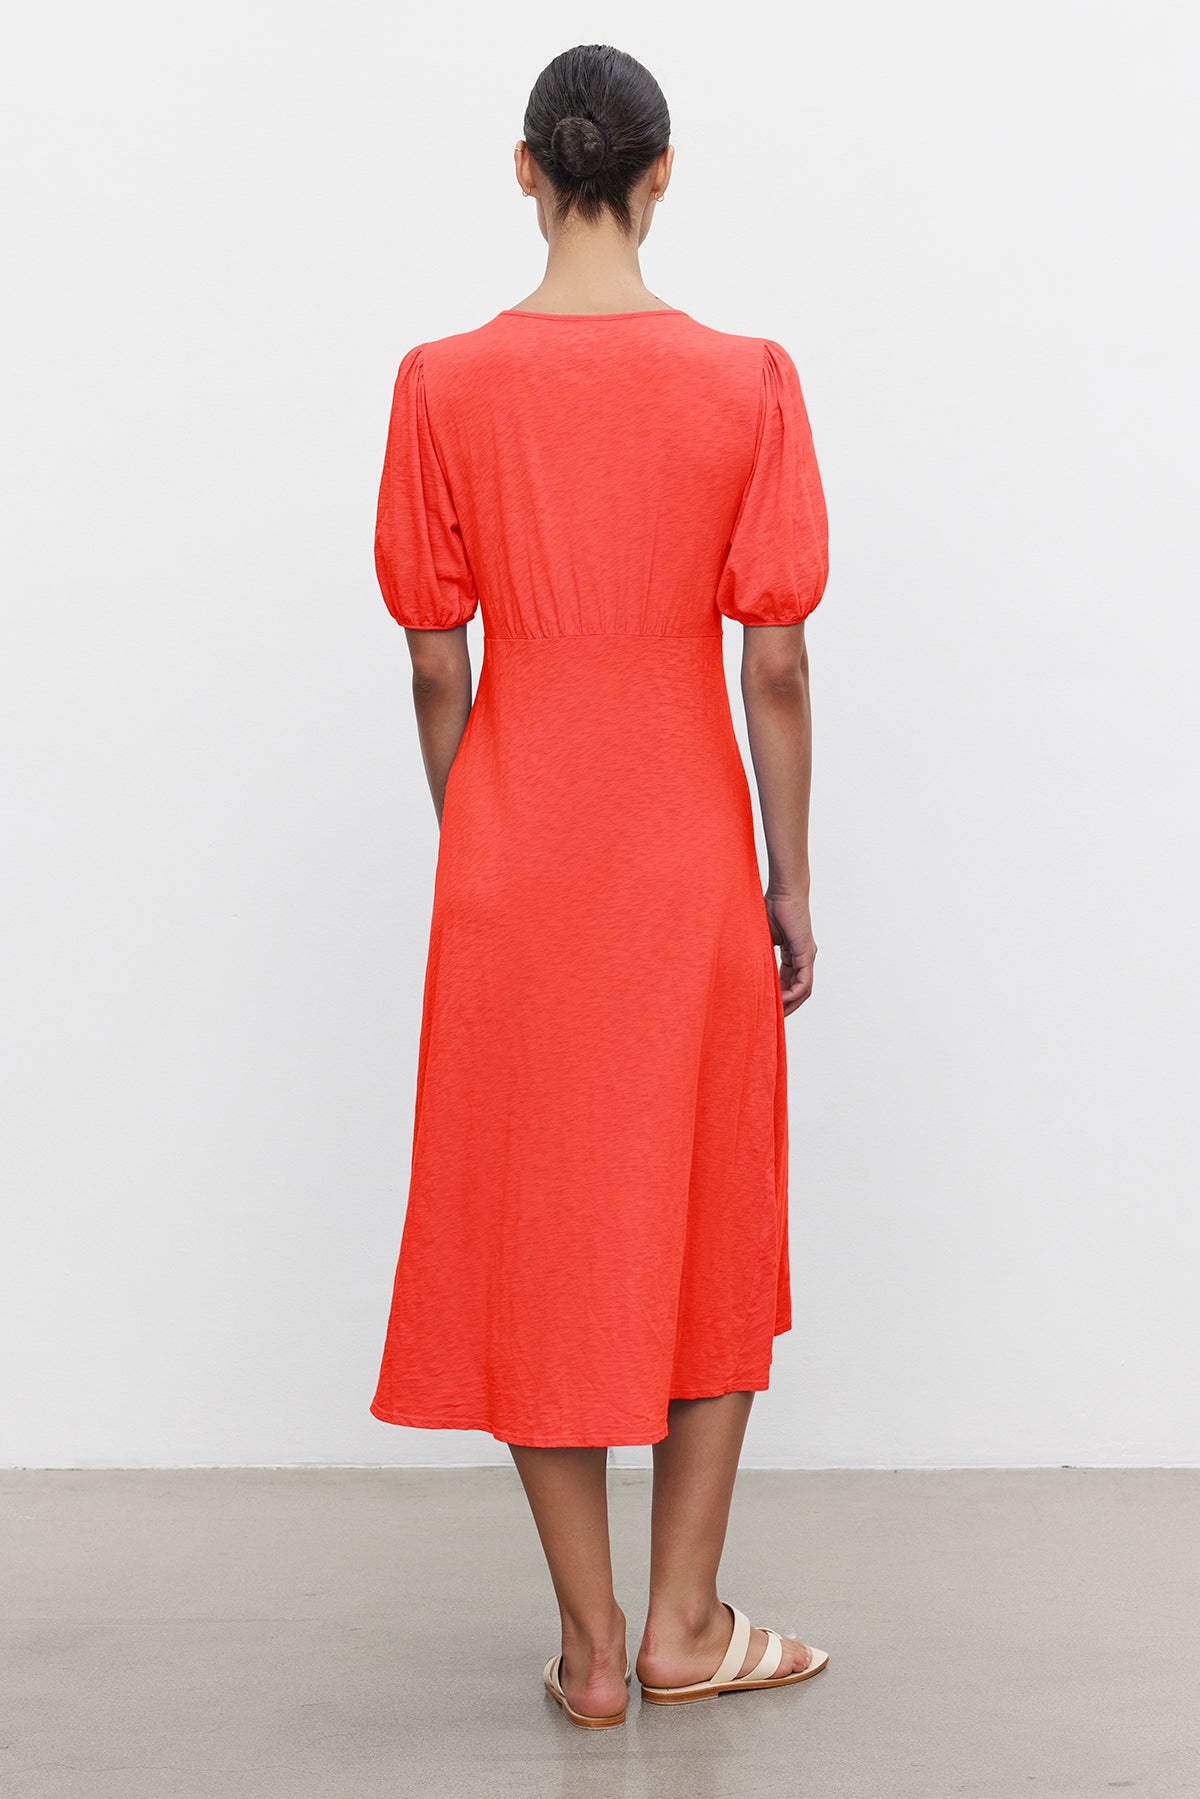 A person with hair in a bun, wearing the PARKER COTTON SLUB MIDI DRESS by Velvet by Graham & Spencer with short puffed sleeves and flat sandals, stands with their back to the camera against a plain white background.-37185421836481